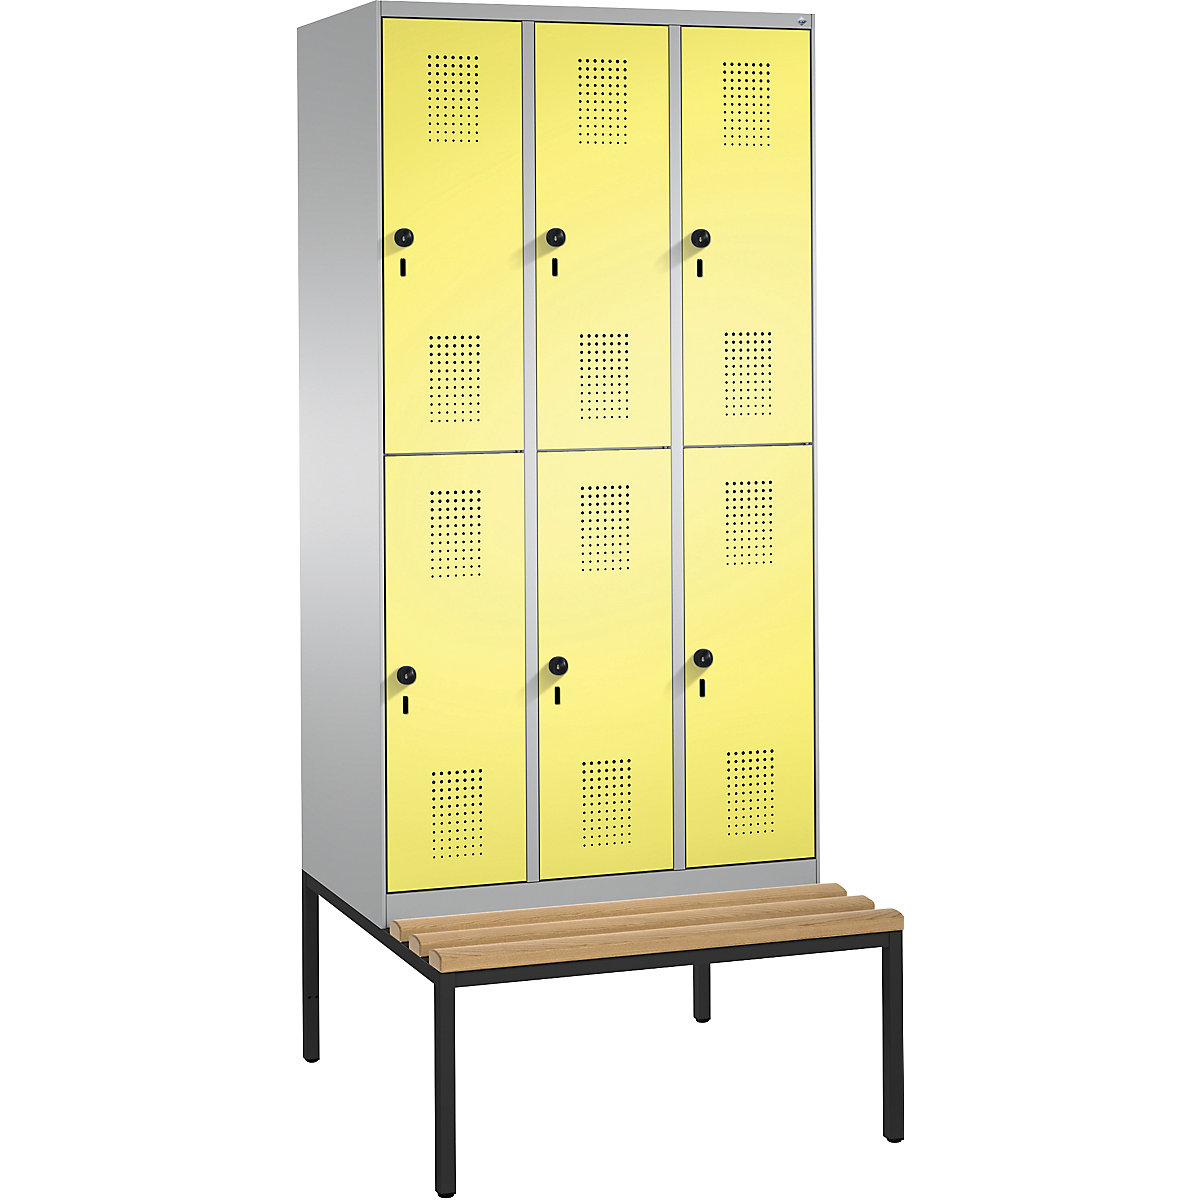 EVOLO cloakroom locker, double tier, with bench – C+P, 3 compartments, 2 shelf compartments each, compartment width 300 mm, white aluminium / sulphur yellow-3